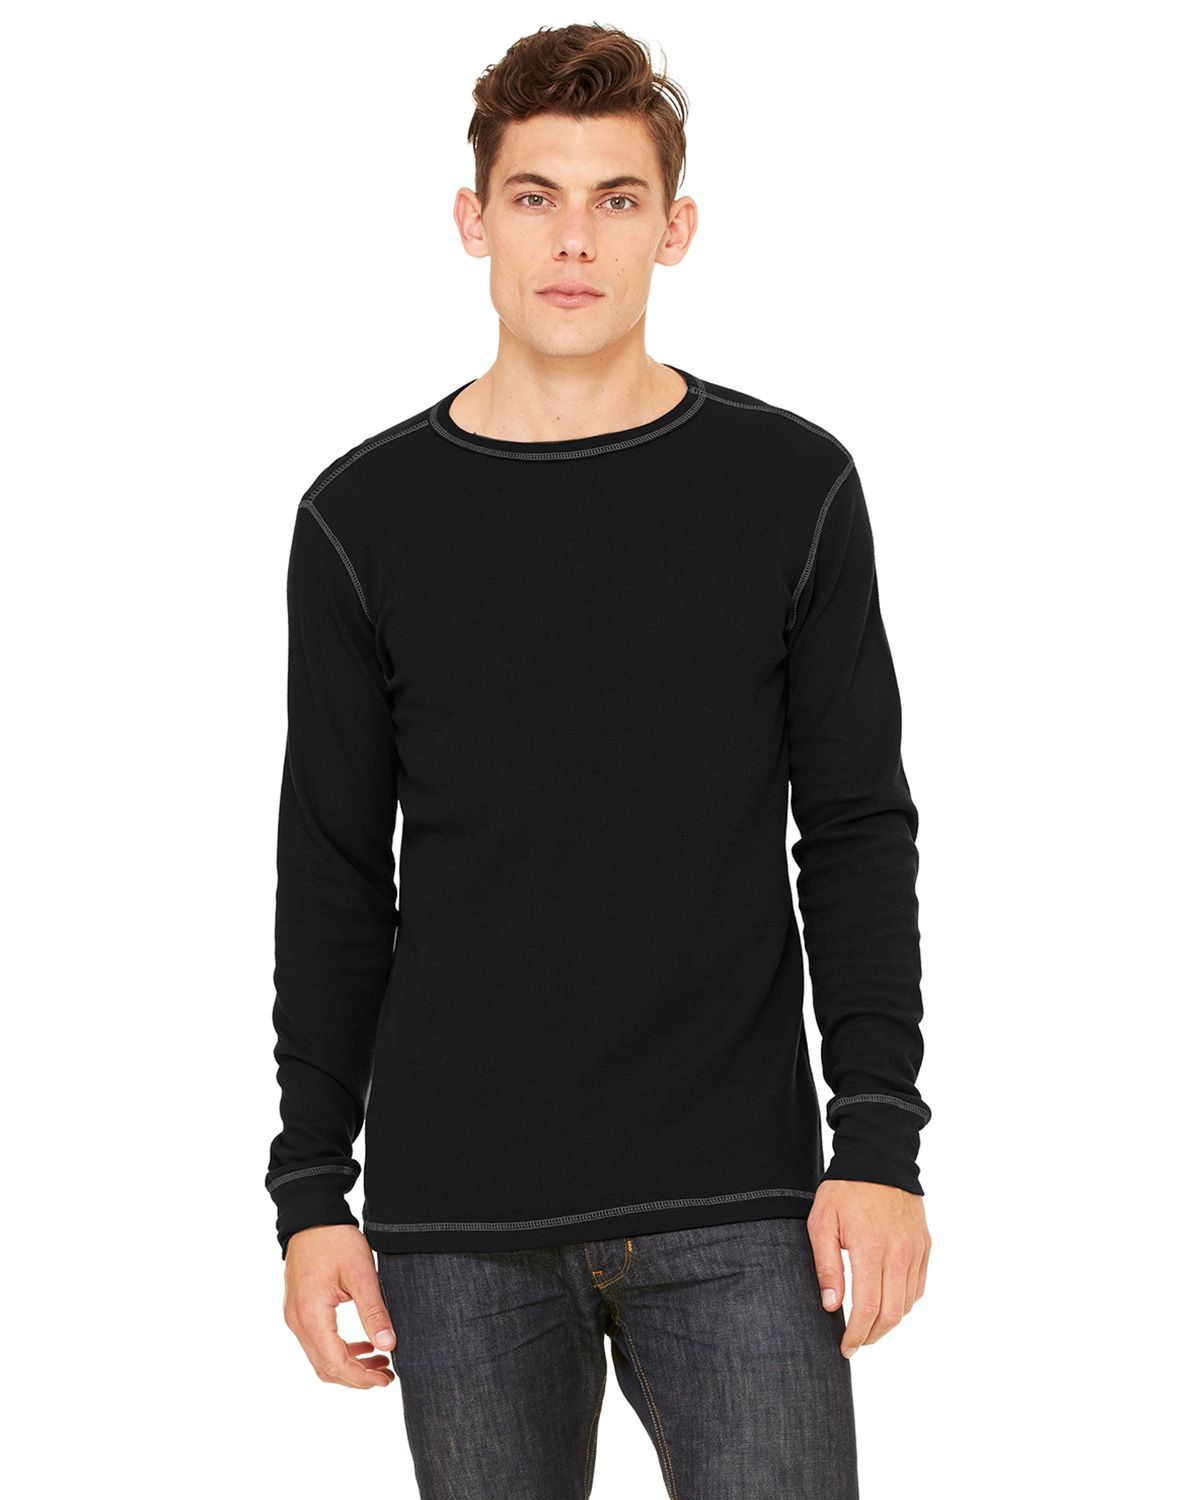 Duofold KMW1 Mens Midweight Thermal Crew 